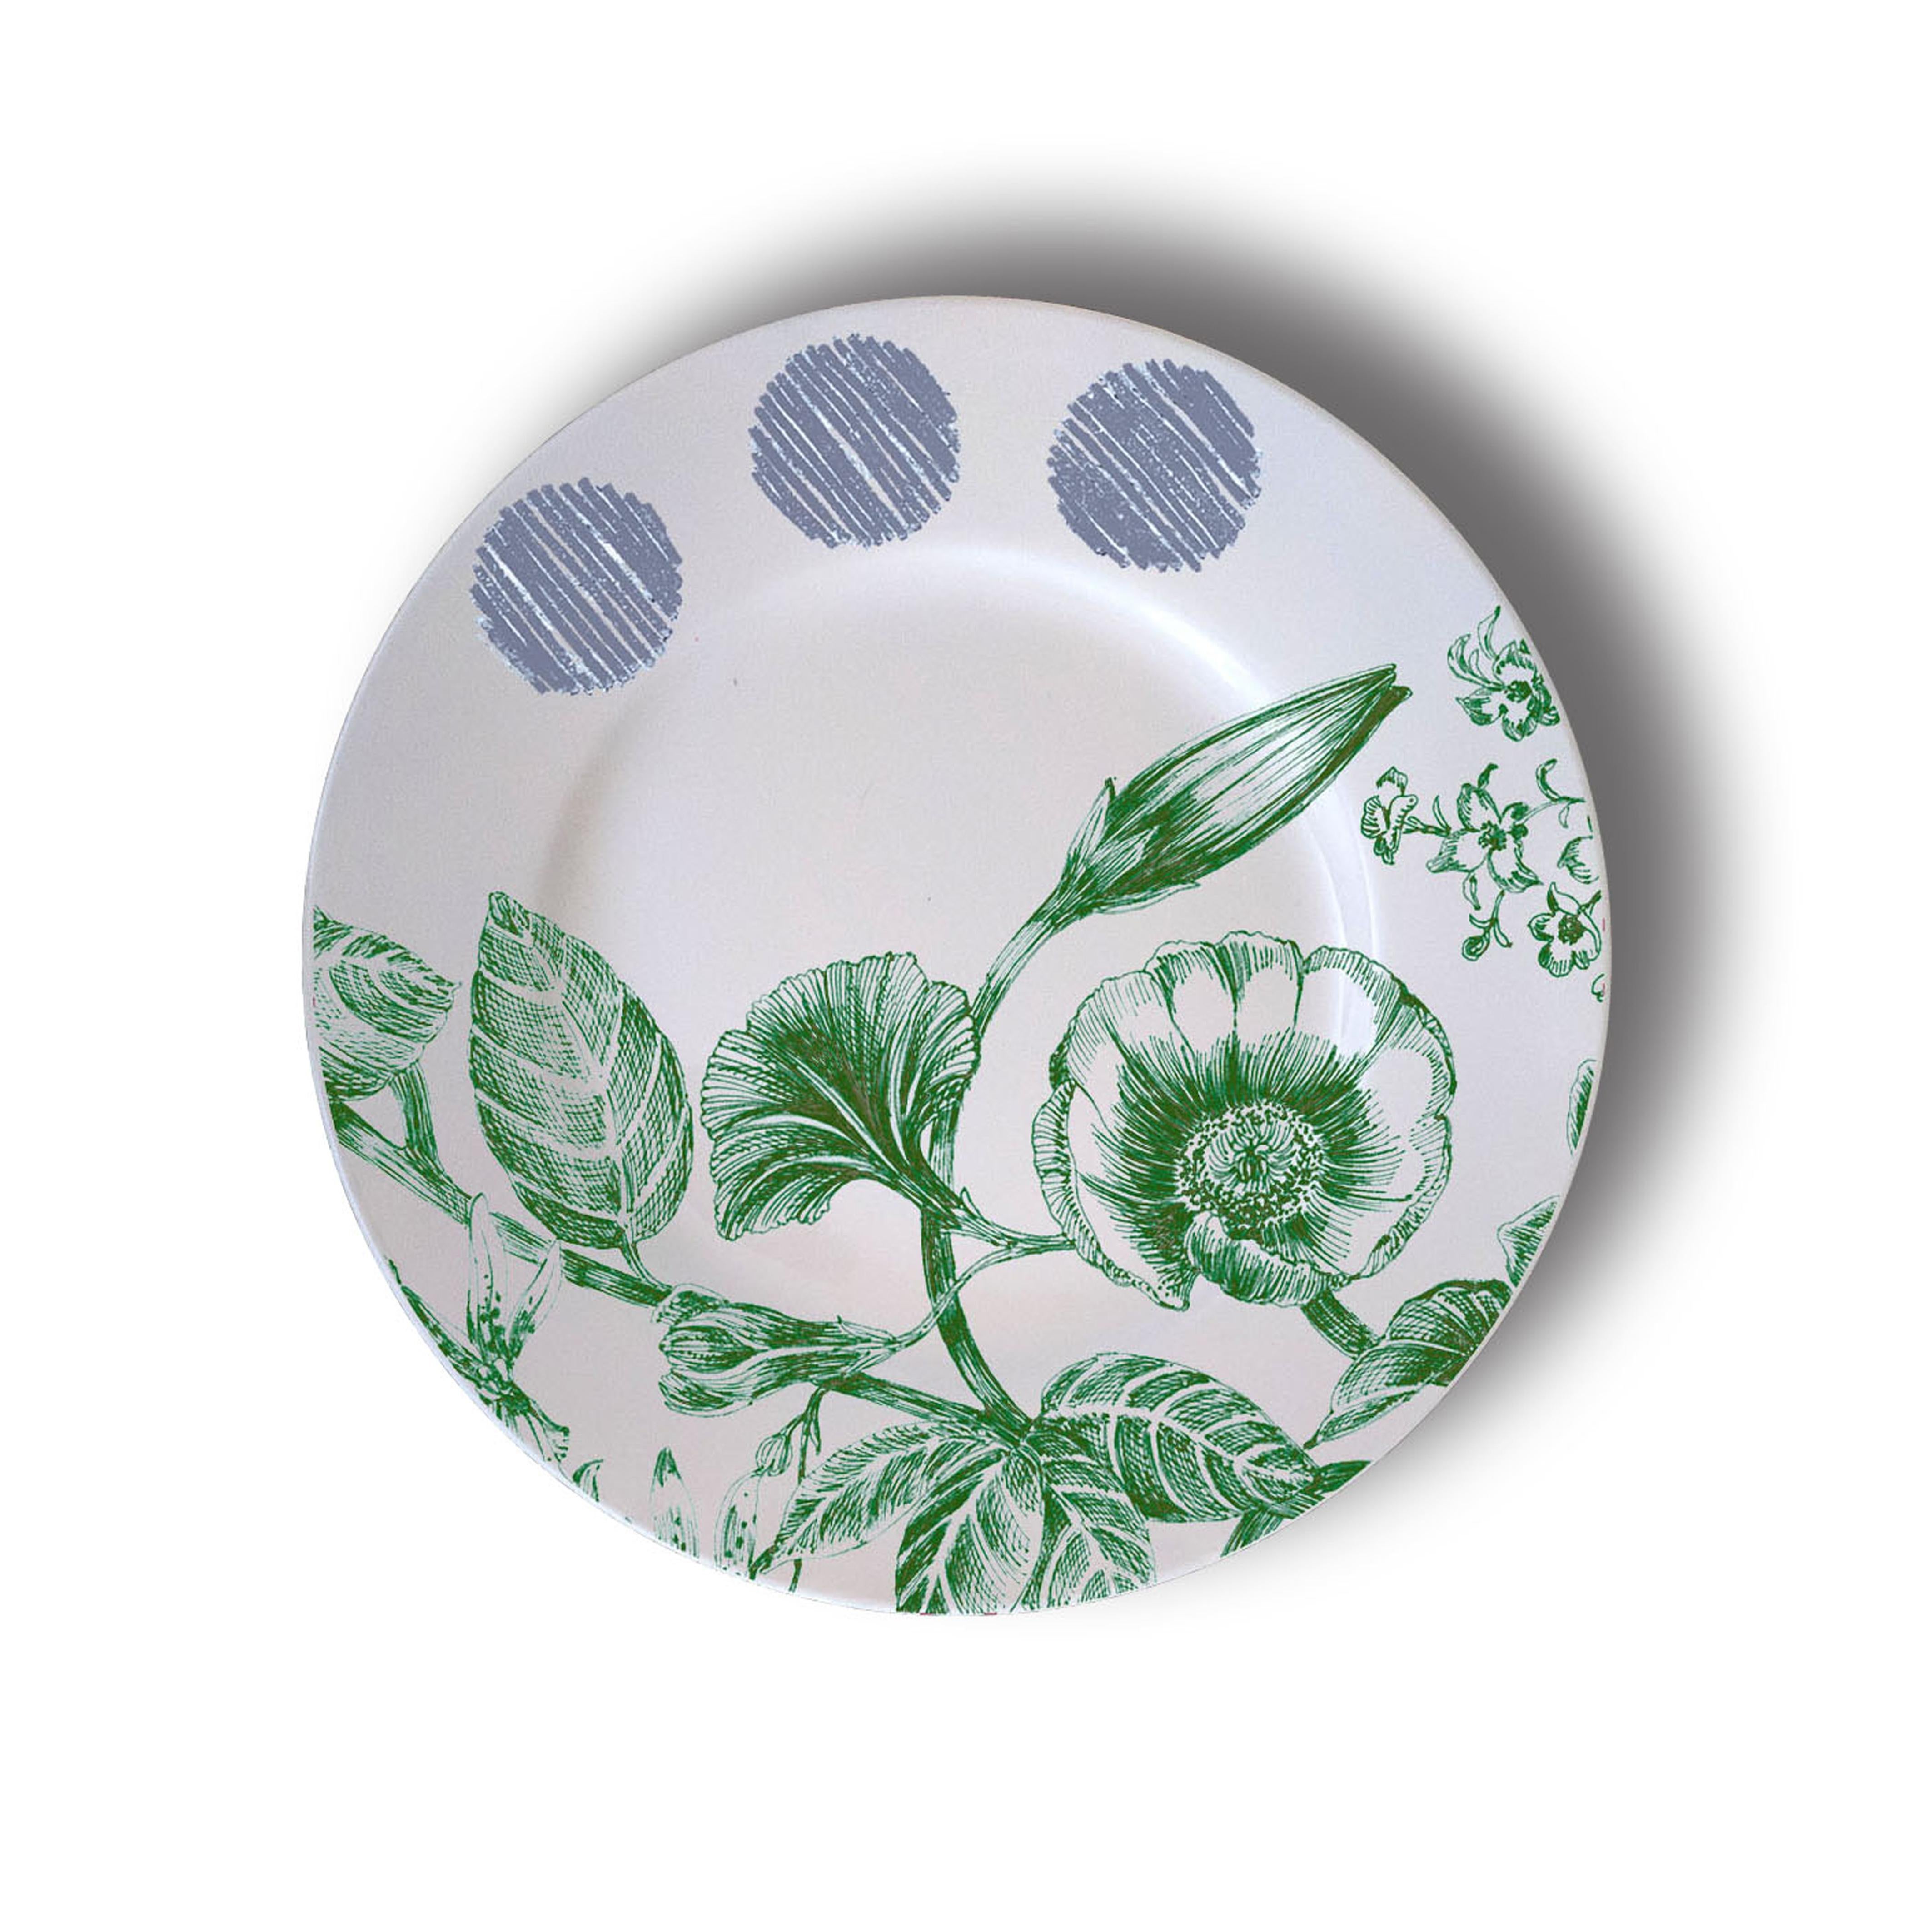 Mix & Match, Six Contemporary Porcelain Bread Plates with Multicolored Flowers For Sale 1